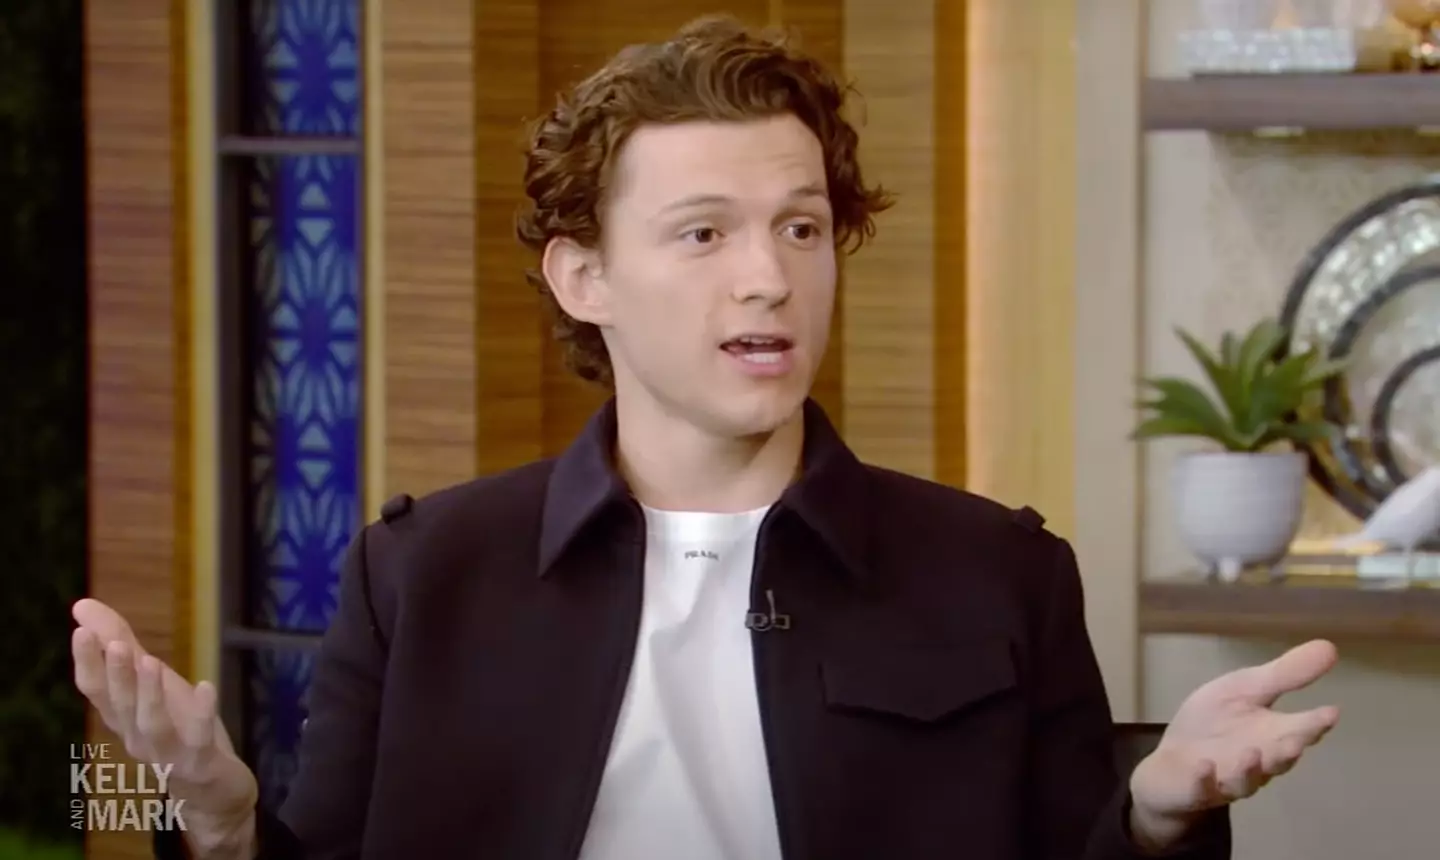 Tom Holland revealed why he's grateful for his fans.